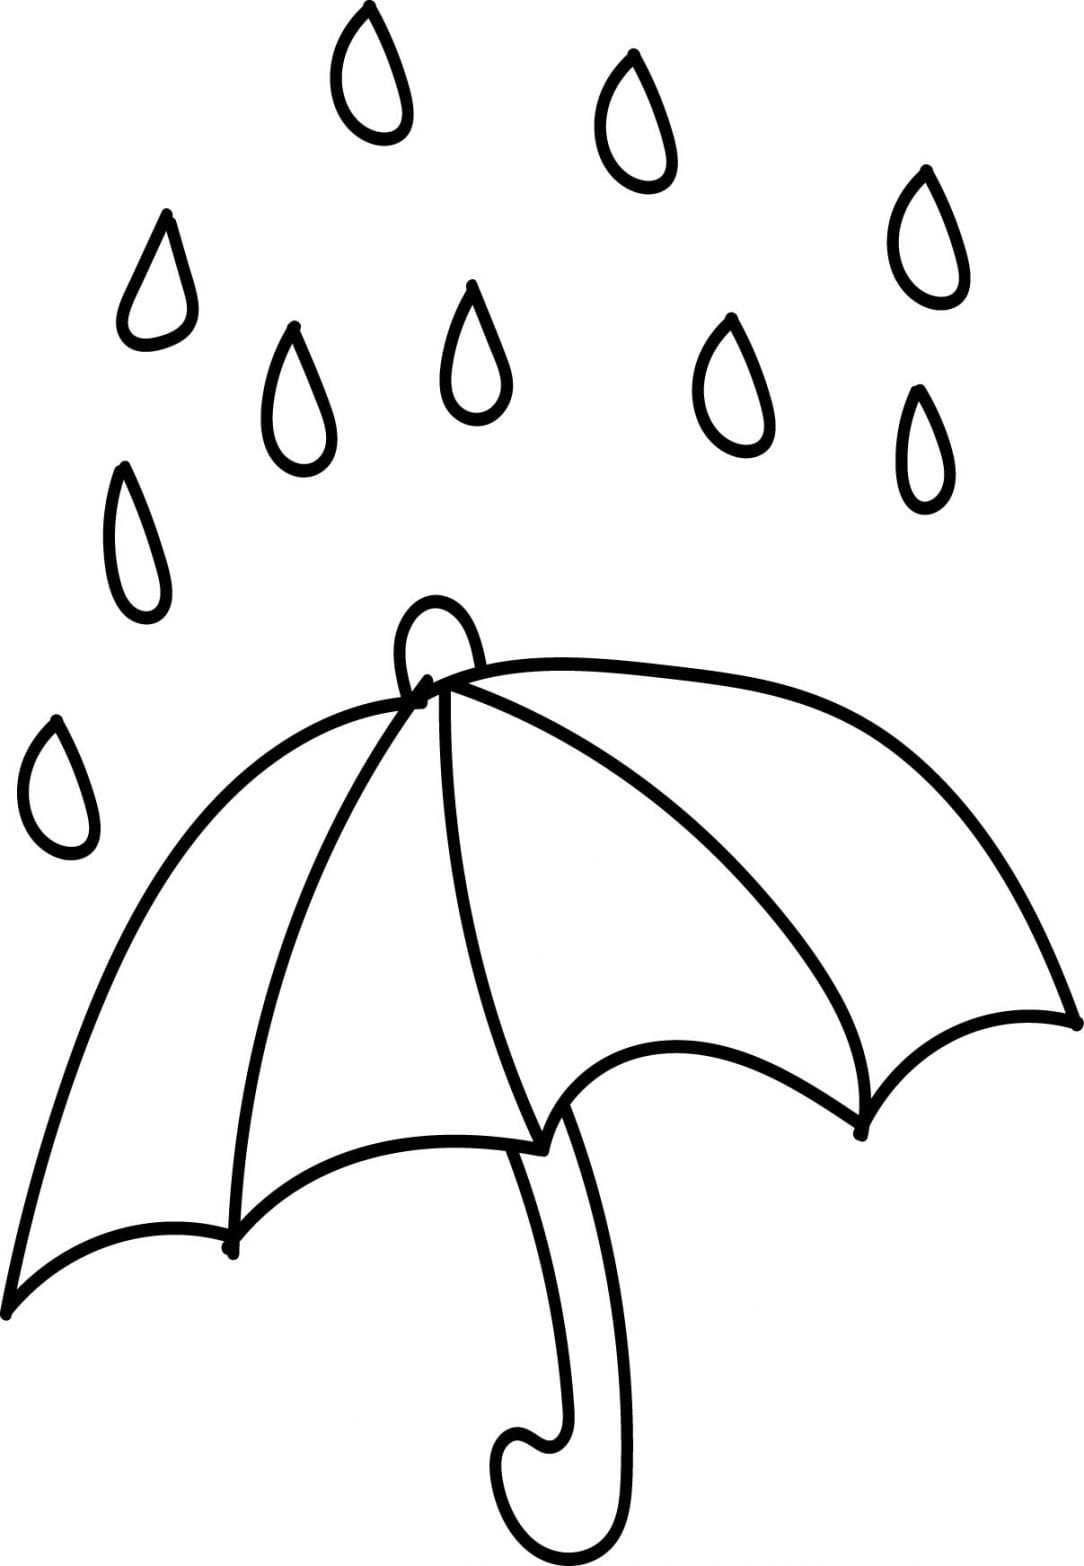 Raindrop Coloring Pages Large Umbrella Coloring Page And Raindrops Girl Bird Beach